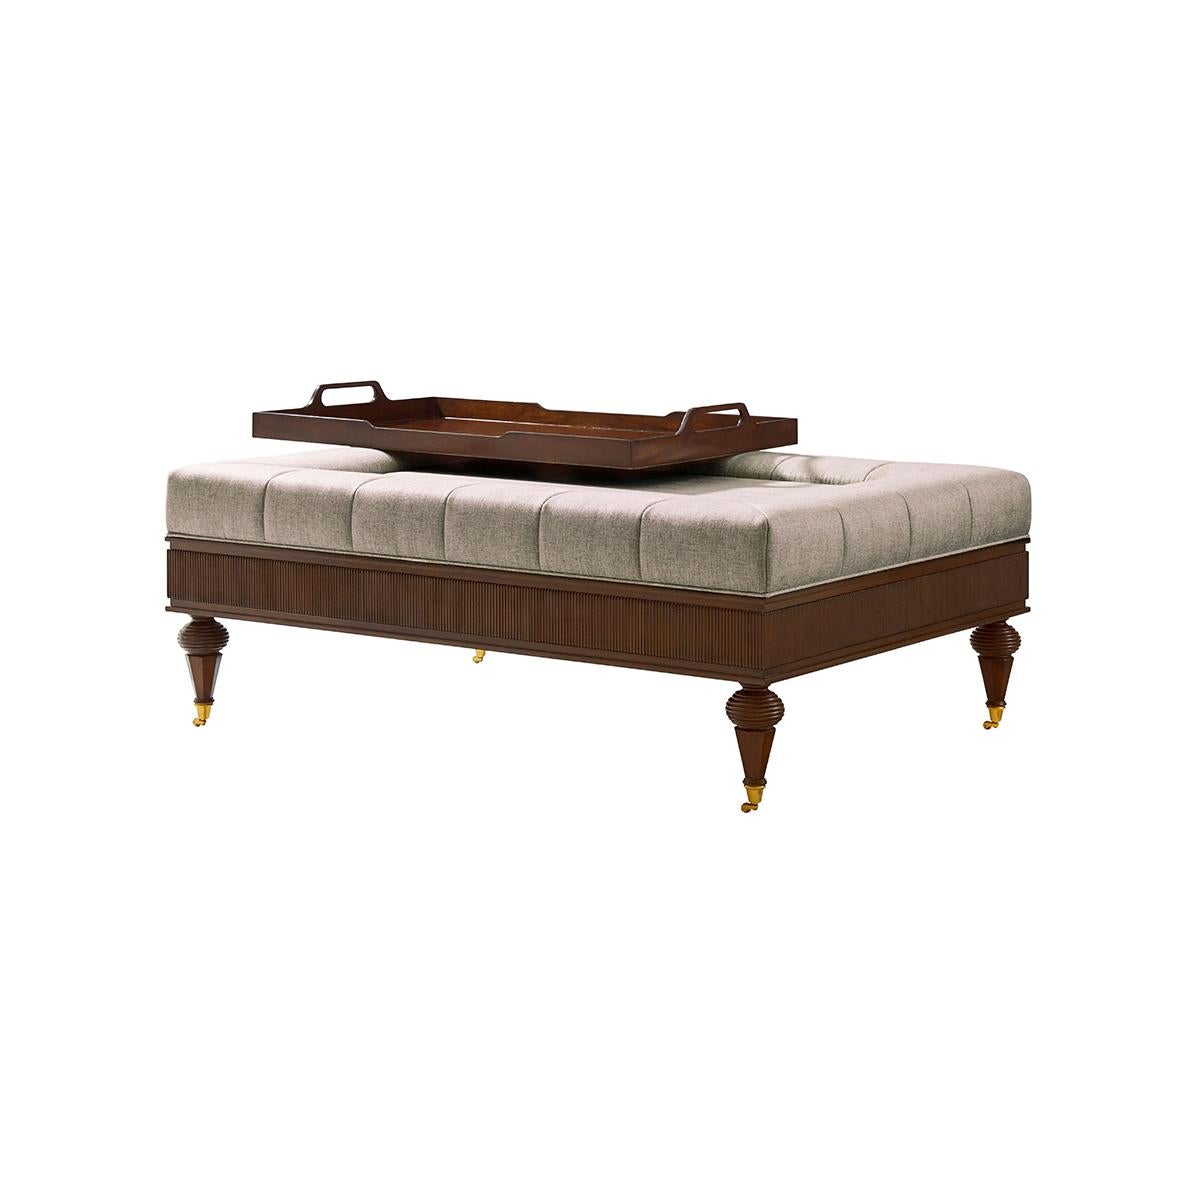 With Anglo-Indian antecedents – and a go-to for today’s home. The channel-upholstered top is paired with a handy removable tray, and set in a reeded panel base. Finished with octagonal tapered legs with capitals and brass castors.

Dimensions: 50